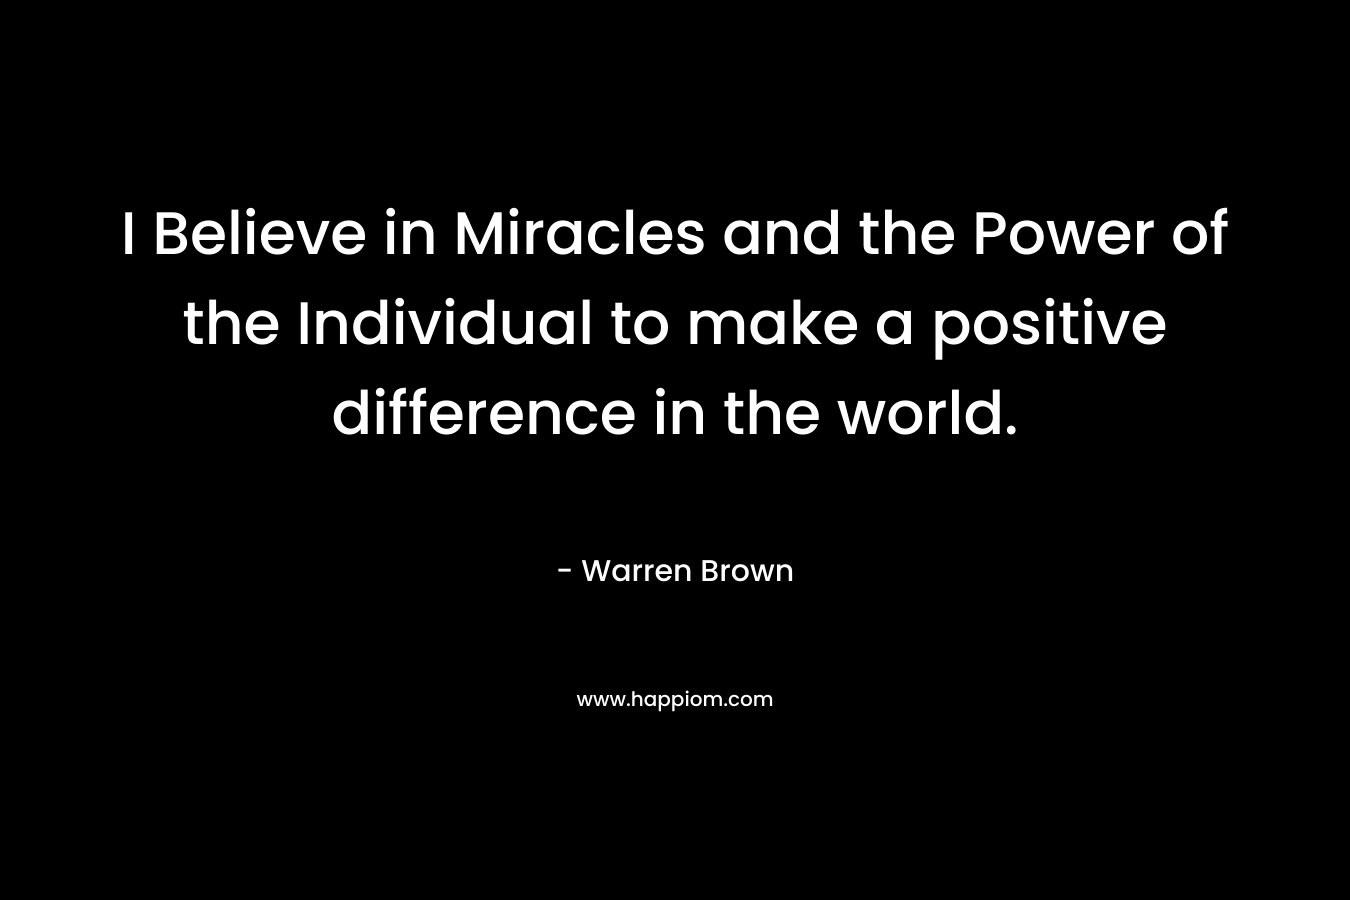 I Believe in Miracles and the Power of the Individual to make a positive difference in the world.